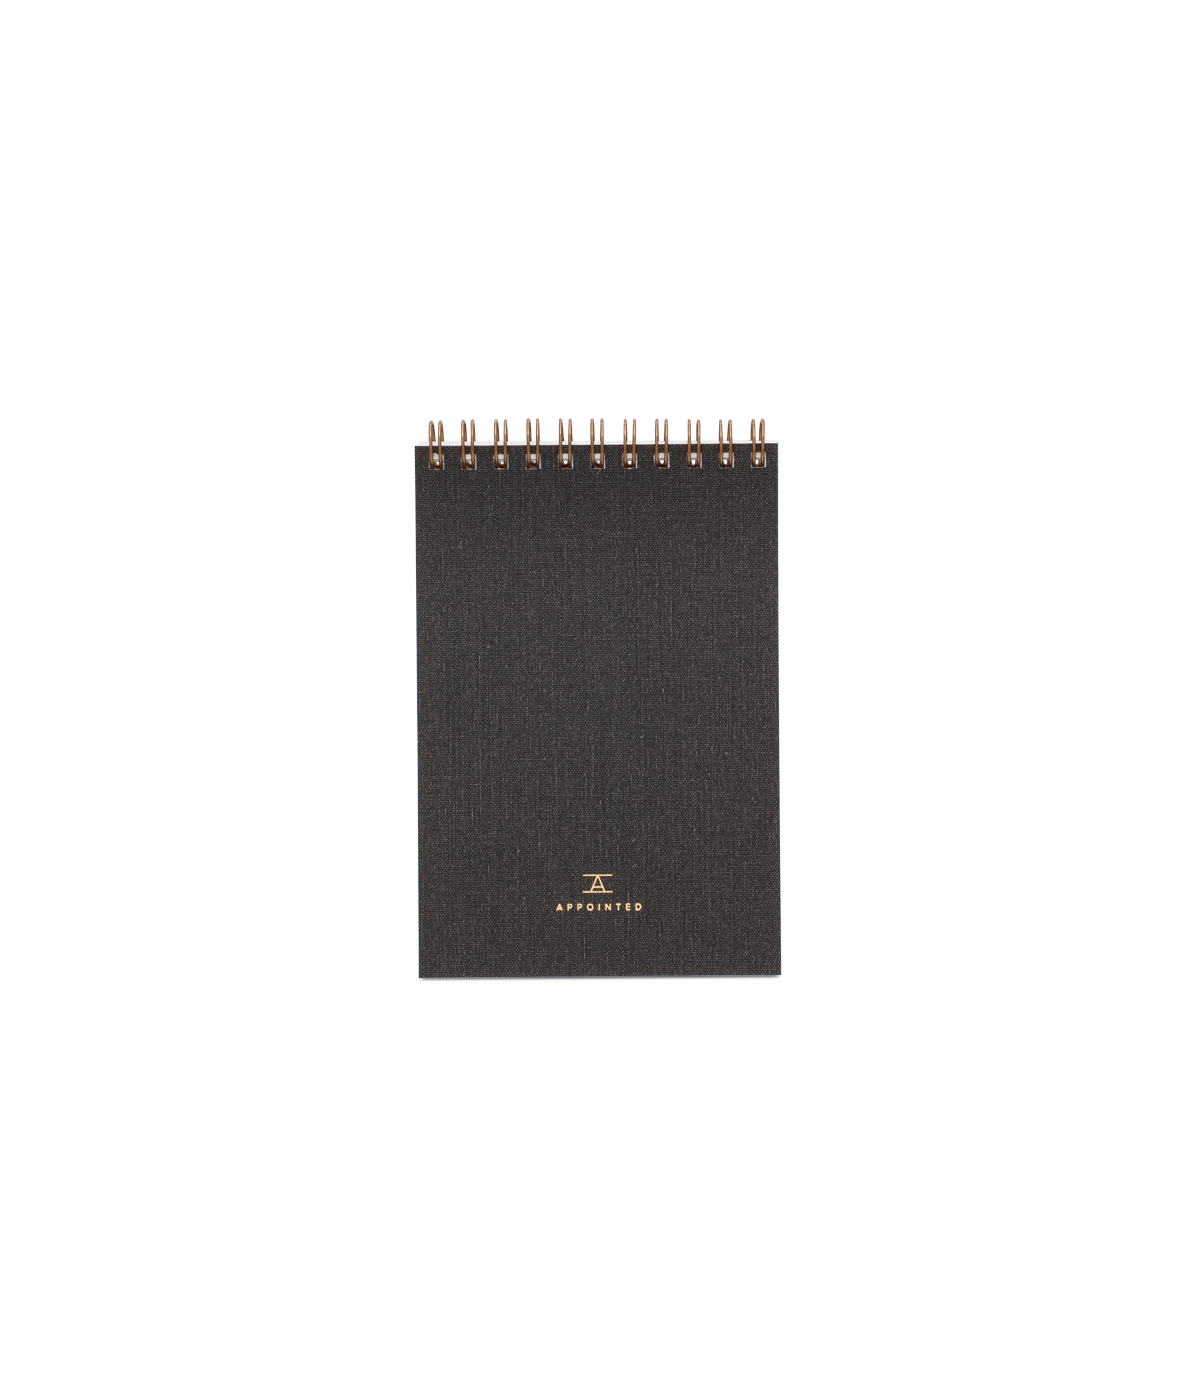 Appointed Pocket Notepad in Charcoal Grey